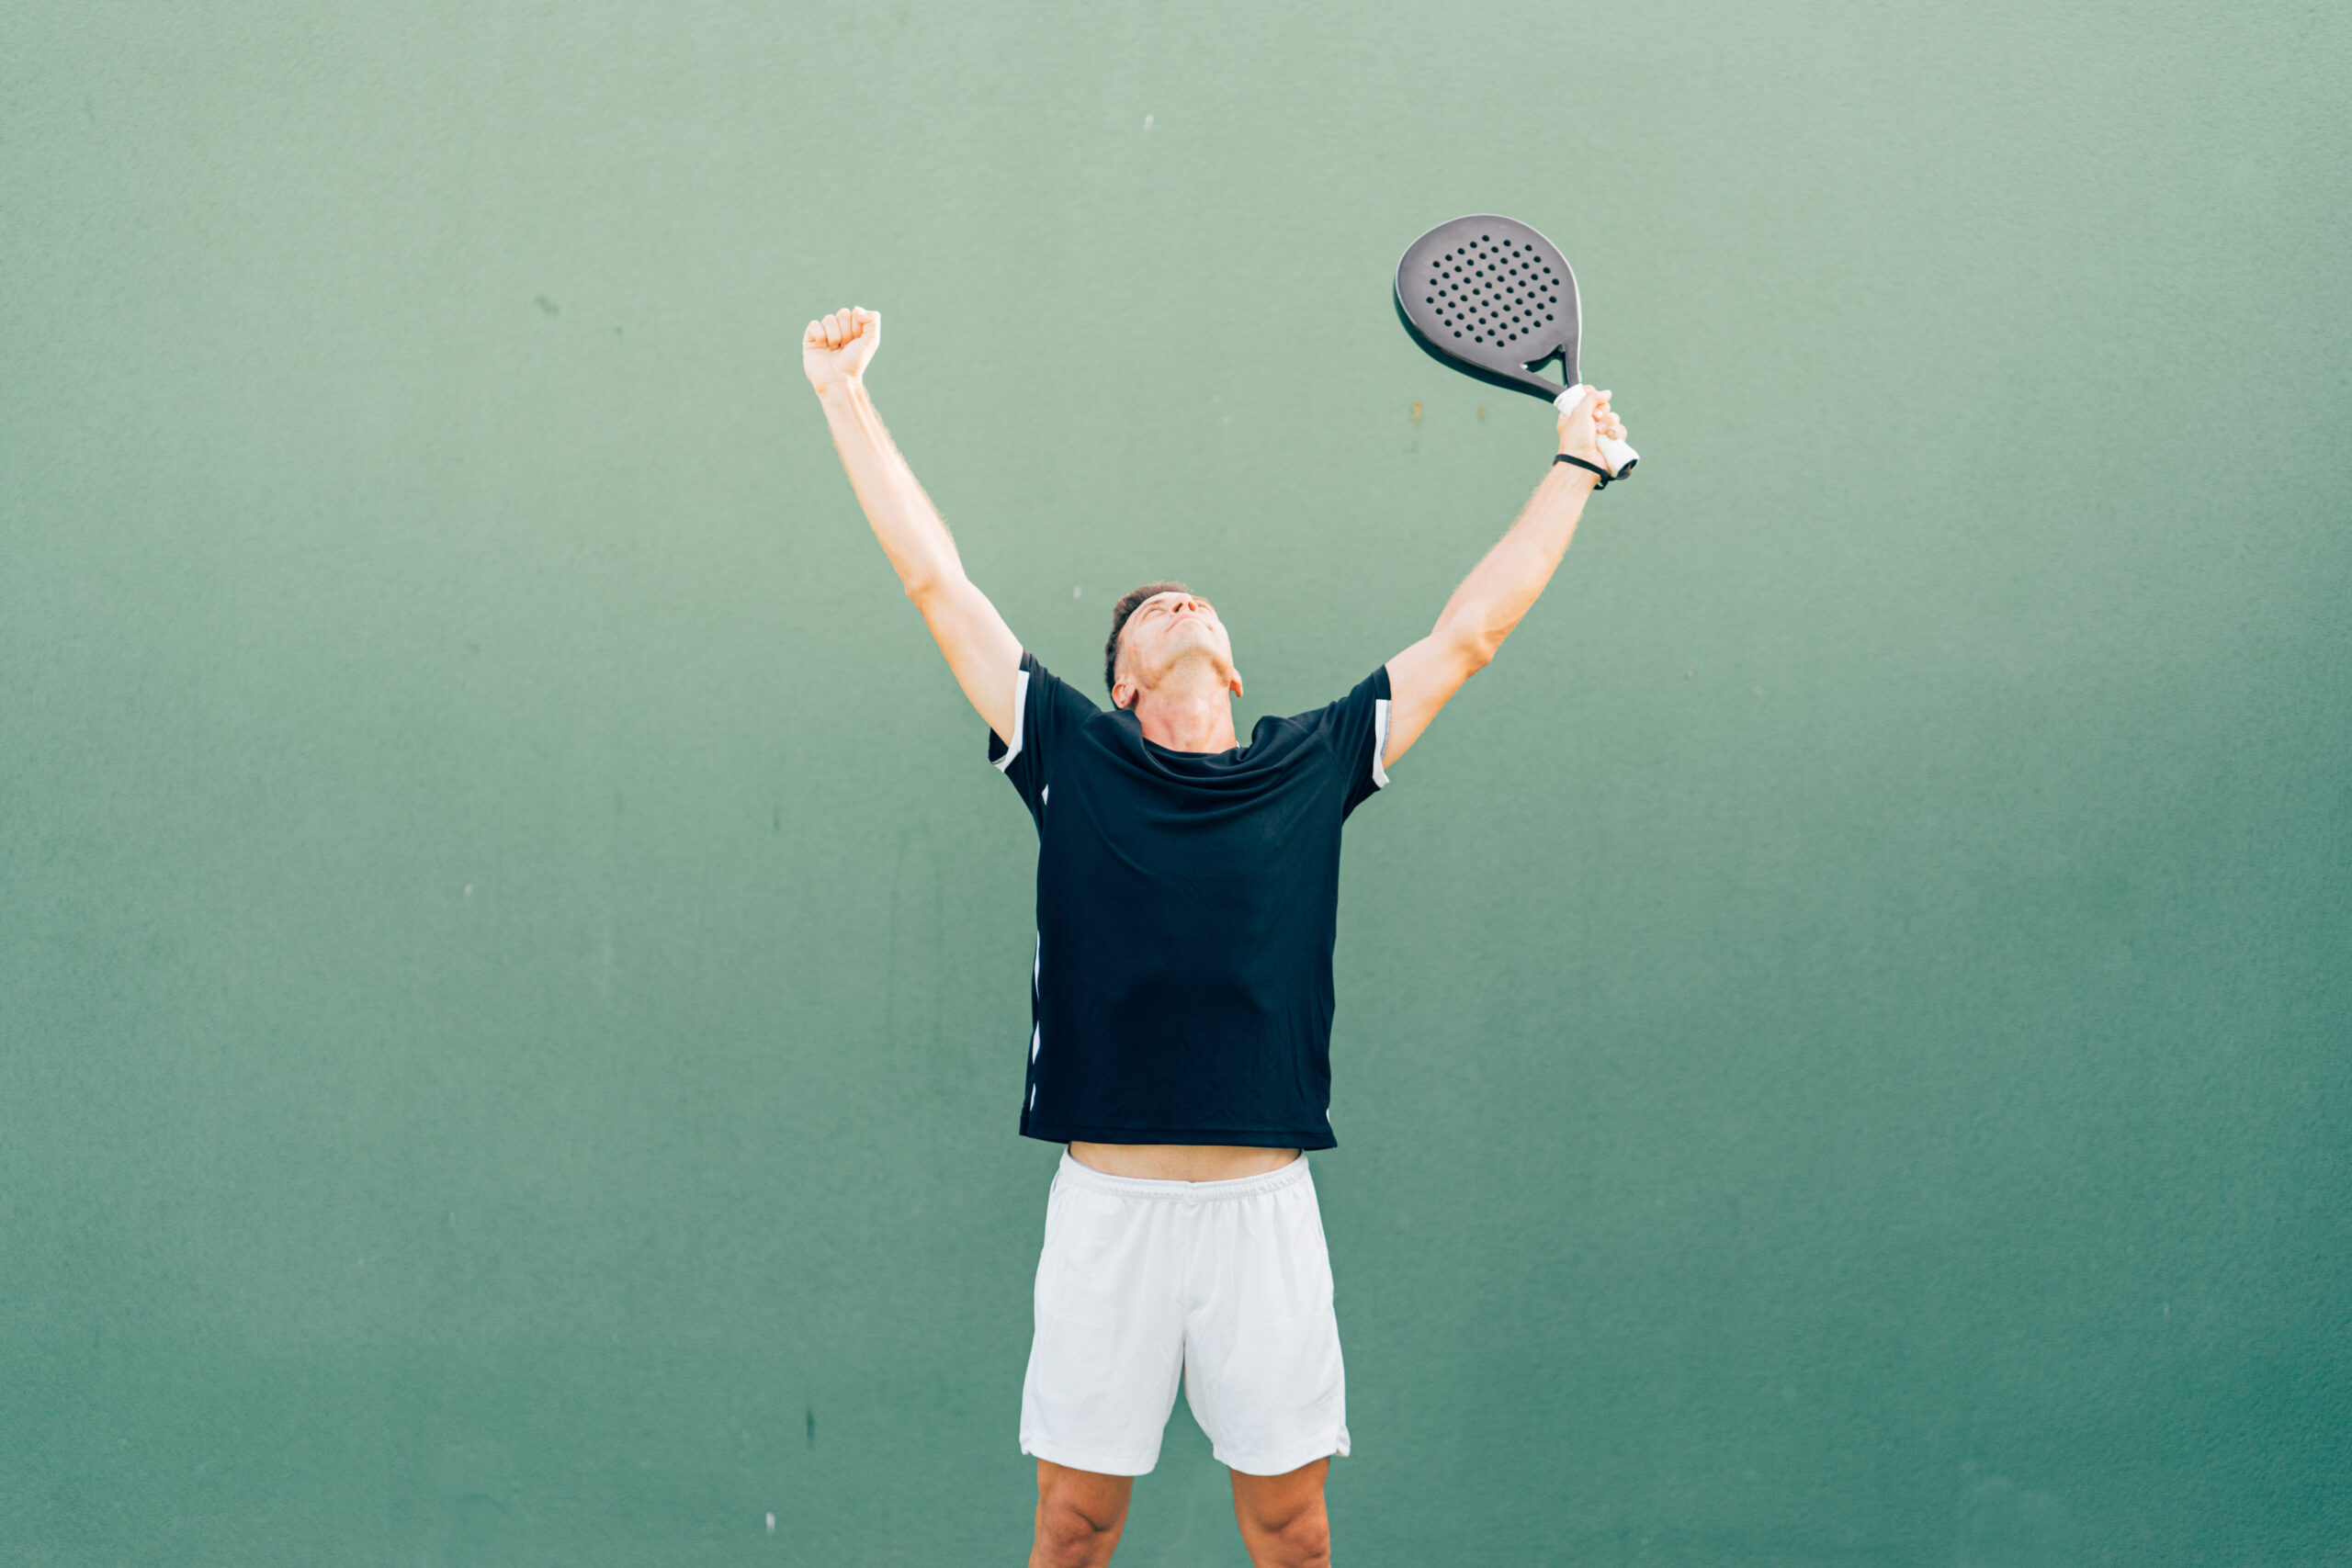 Paddle tennis player celebrating victory at the end of the match